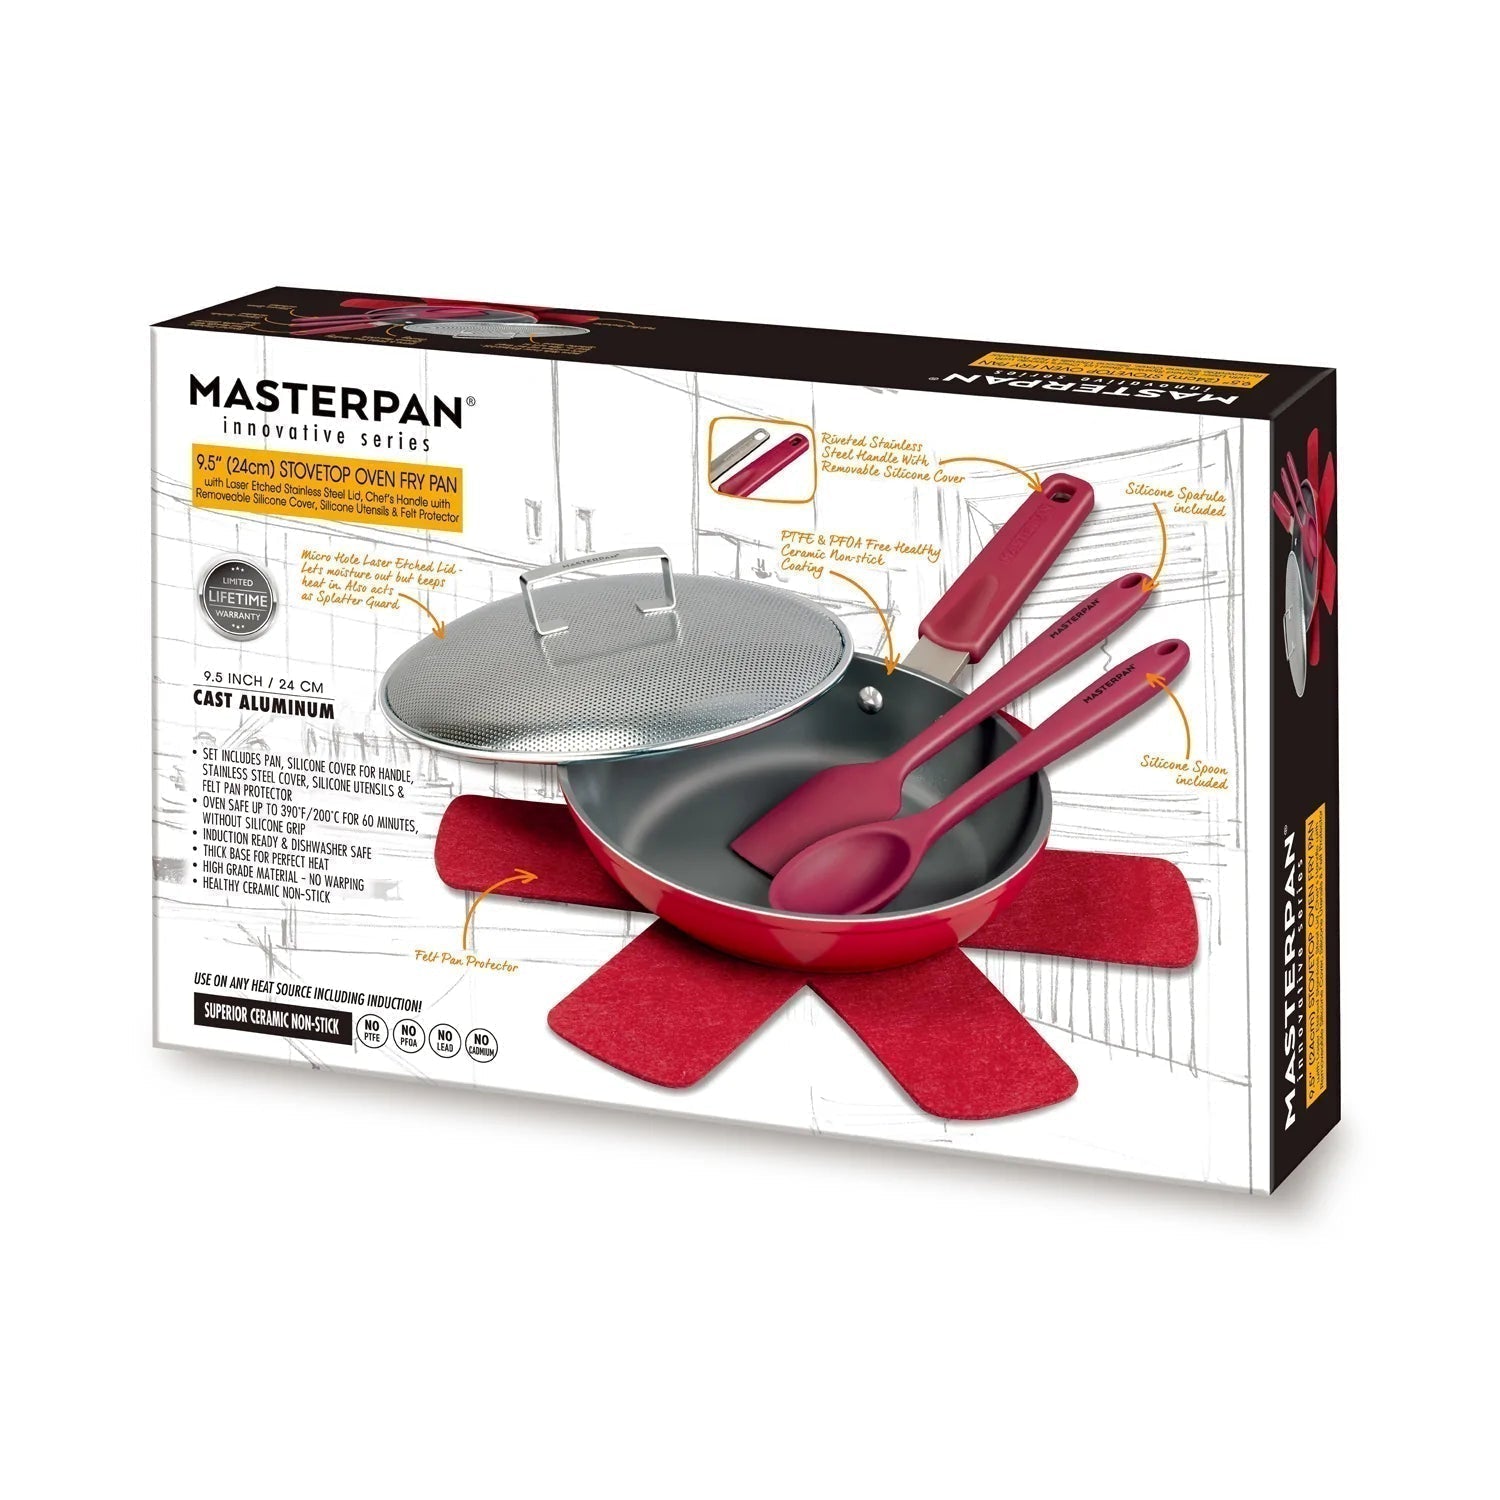 MASTERPAN Chef's Series 10” Beet Stovetop Oven Fry Pan & Skillet With Heat-in Steam-Out Lid, Healthy Ceramic Non-stick Aluminum With Stainless Steel Chef’s Handle, Bonus 2 Utensils and Felt Pan Protector